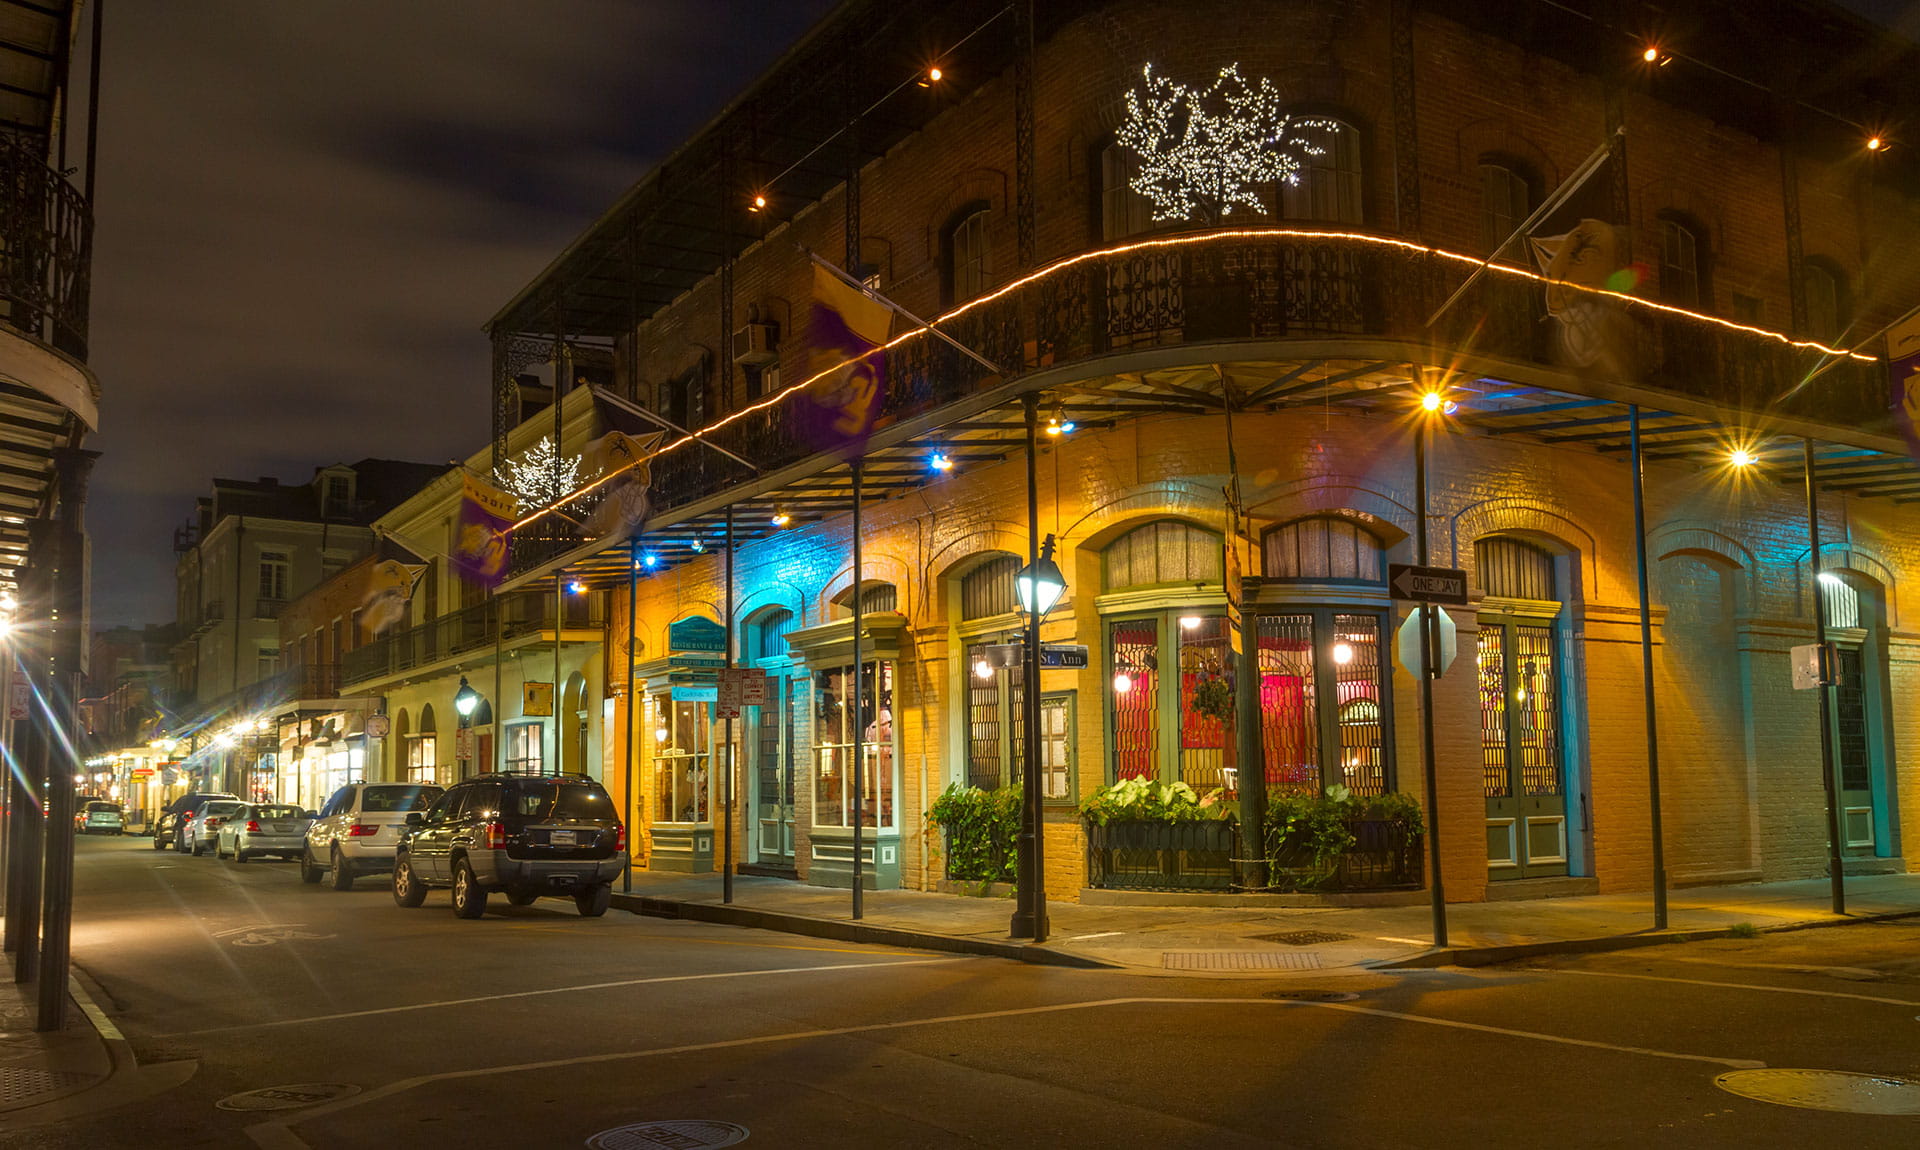 Downtown New Orleans at night